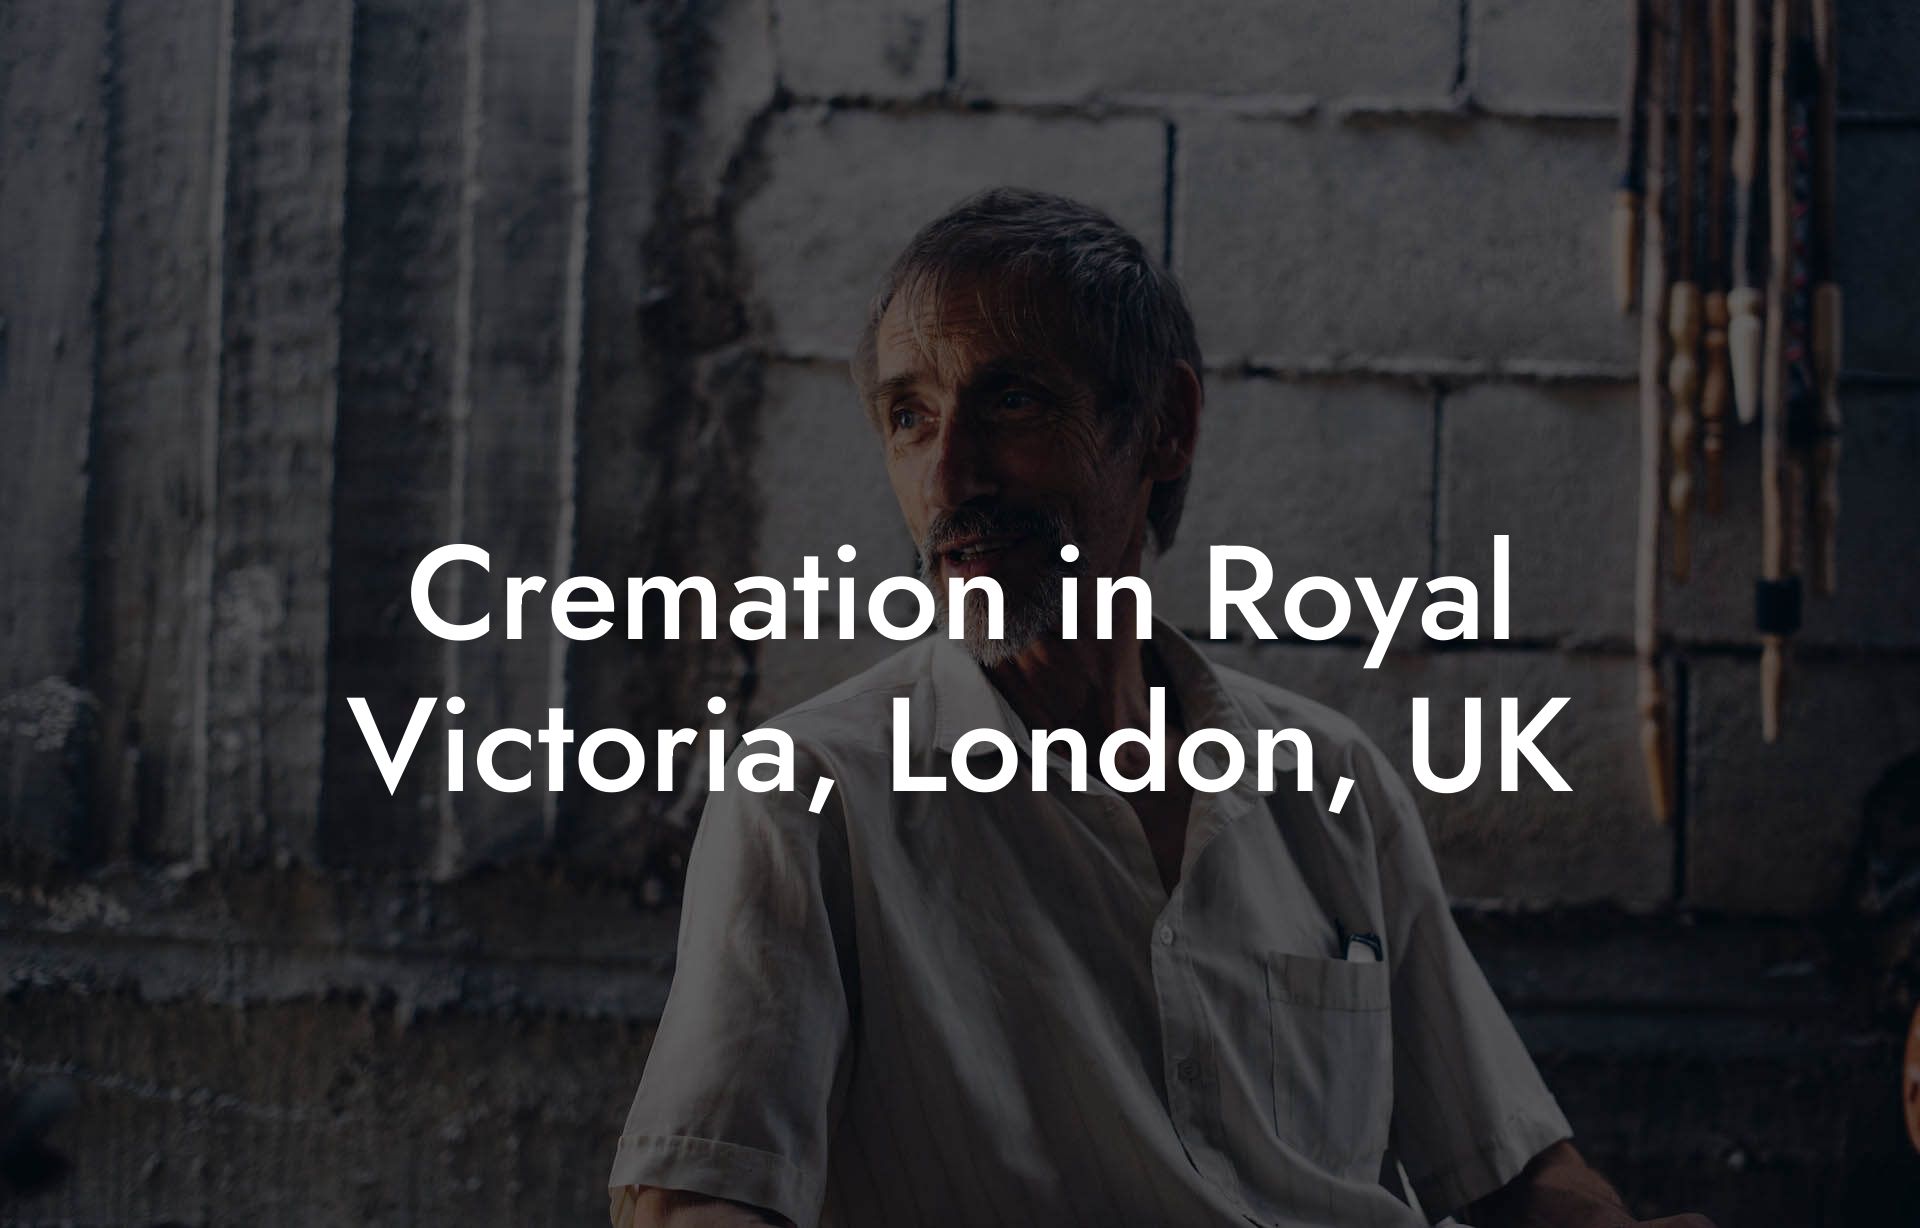 Cremation in Royal Victoria, London, UK